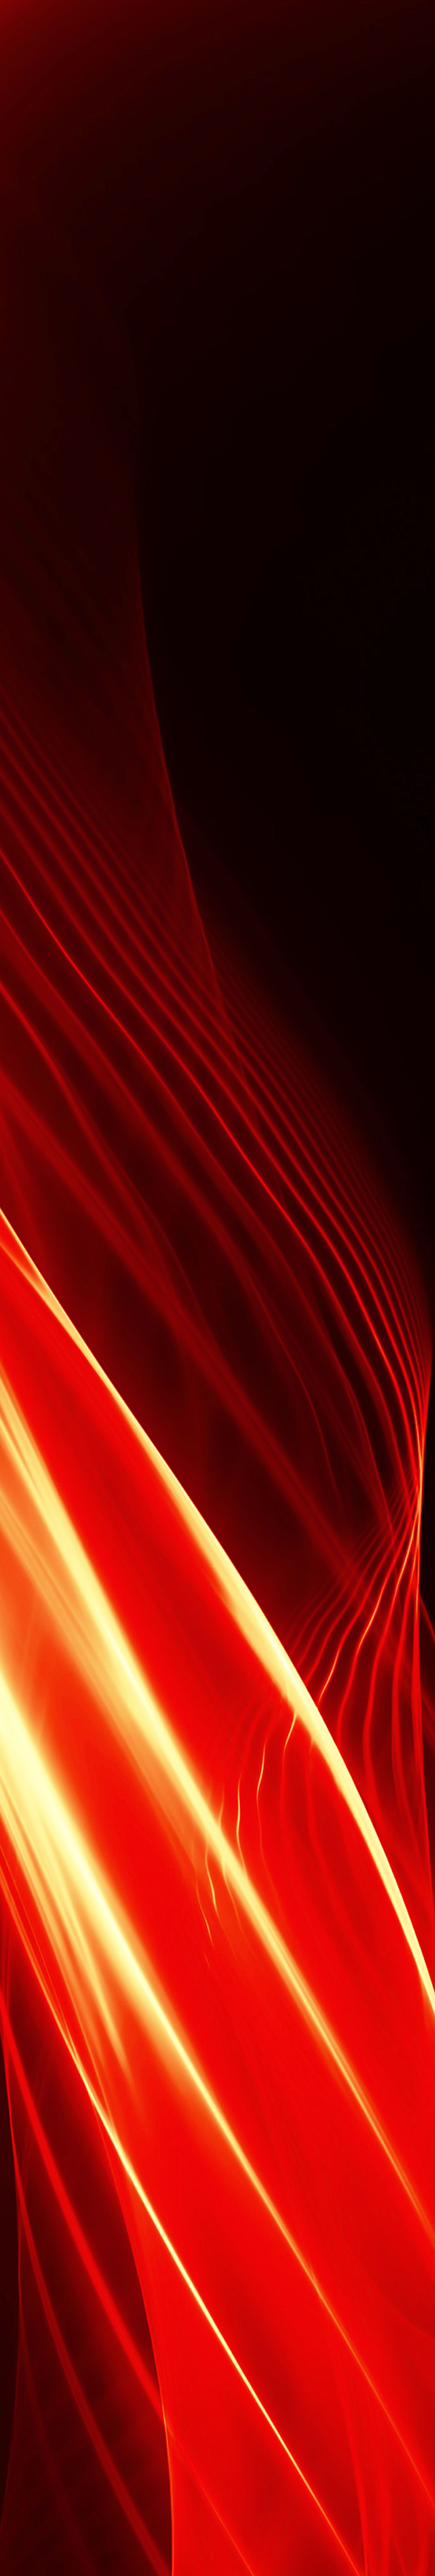 Black background image with red, orange and white light flares